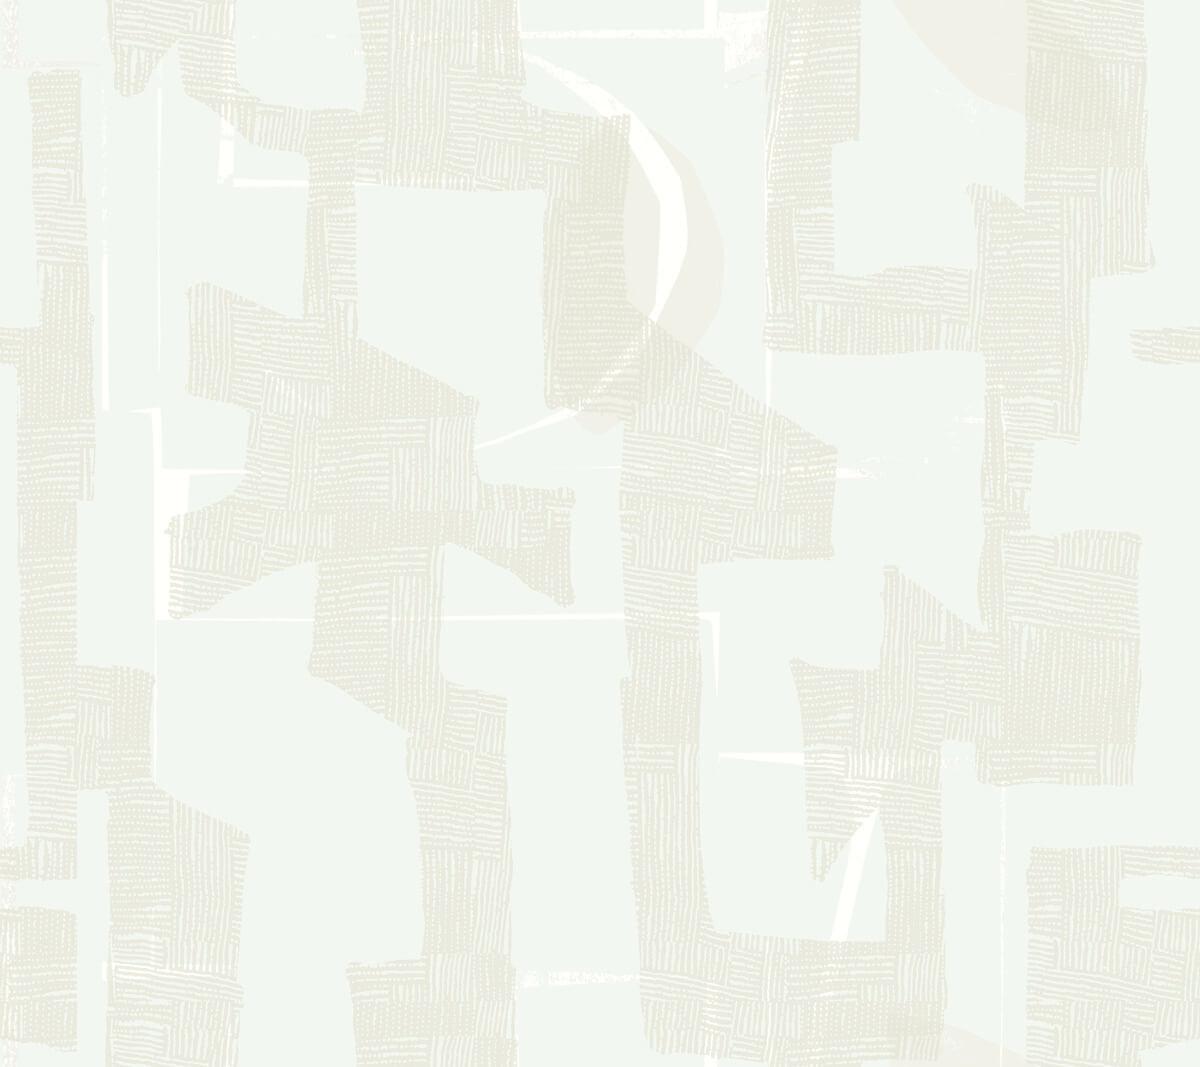 Artistic Abstracts Modern Tribal Wallpaper - White